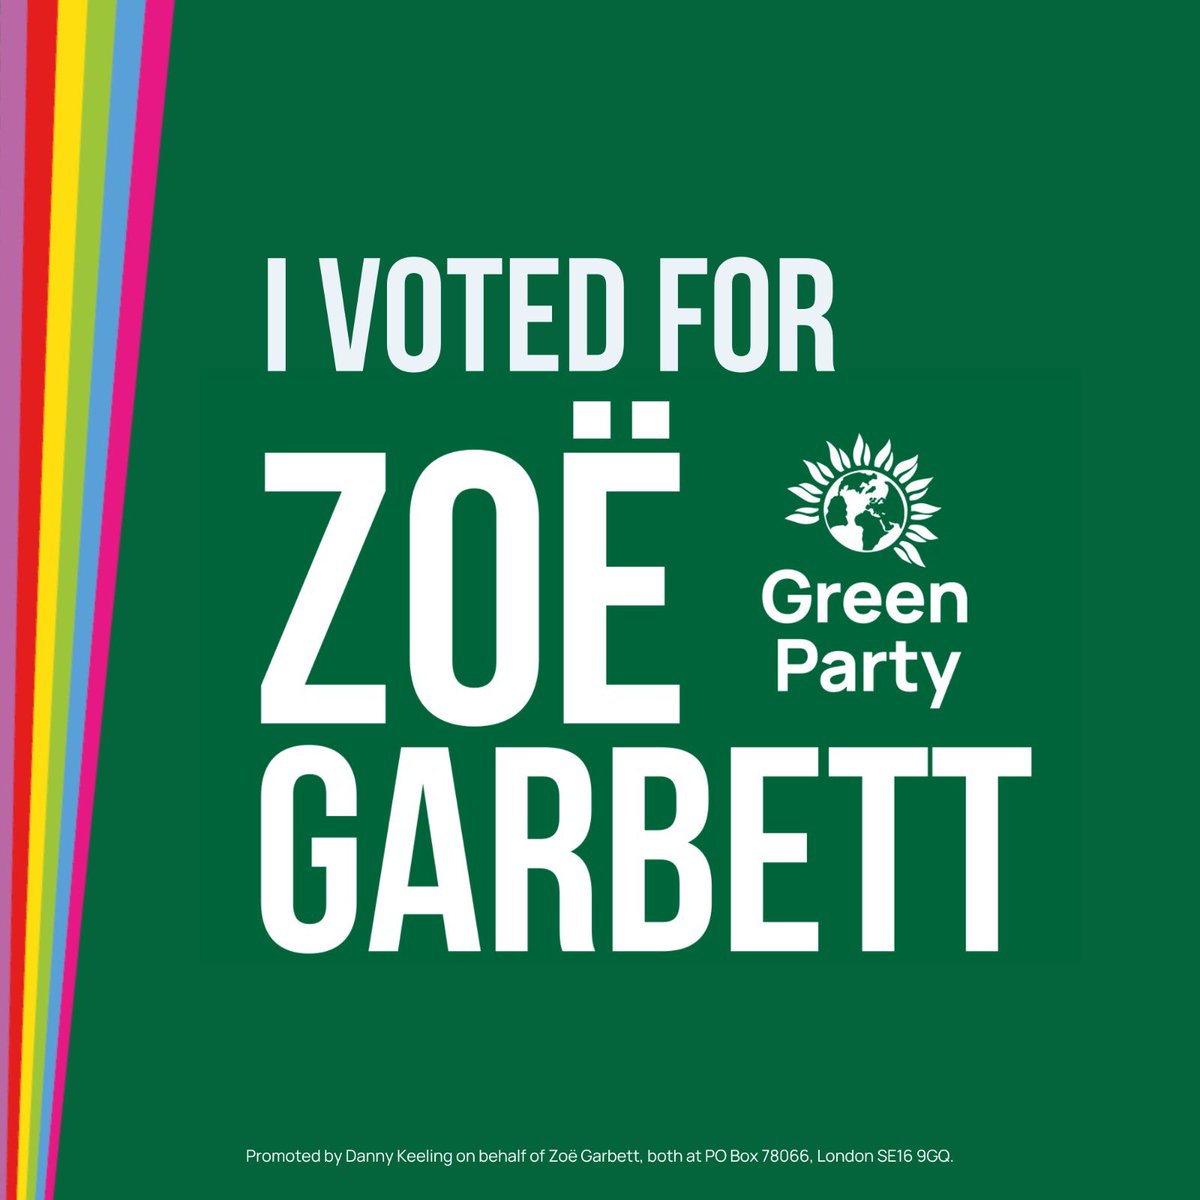 So pleased @ZoeGarbett supports #10ParksForLondon and yet another reason why she got my vote!